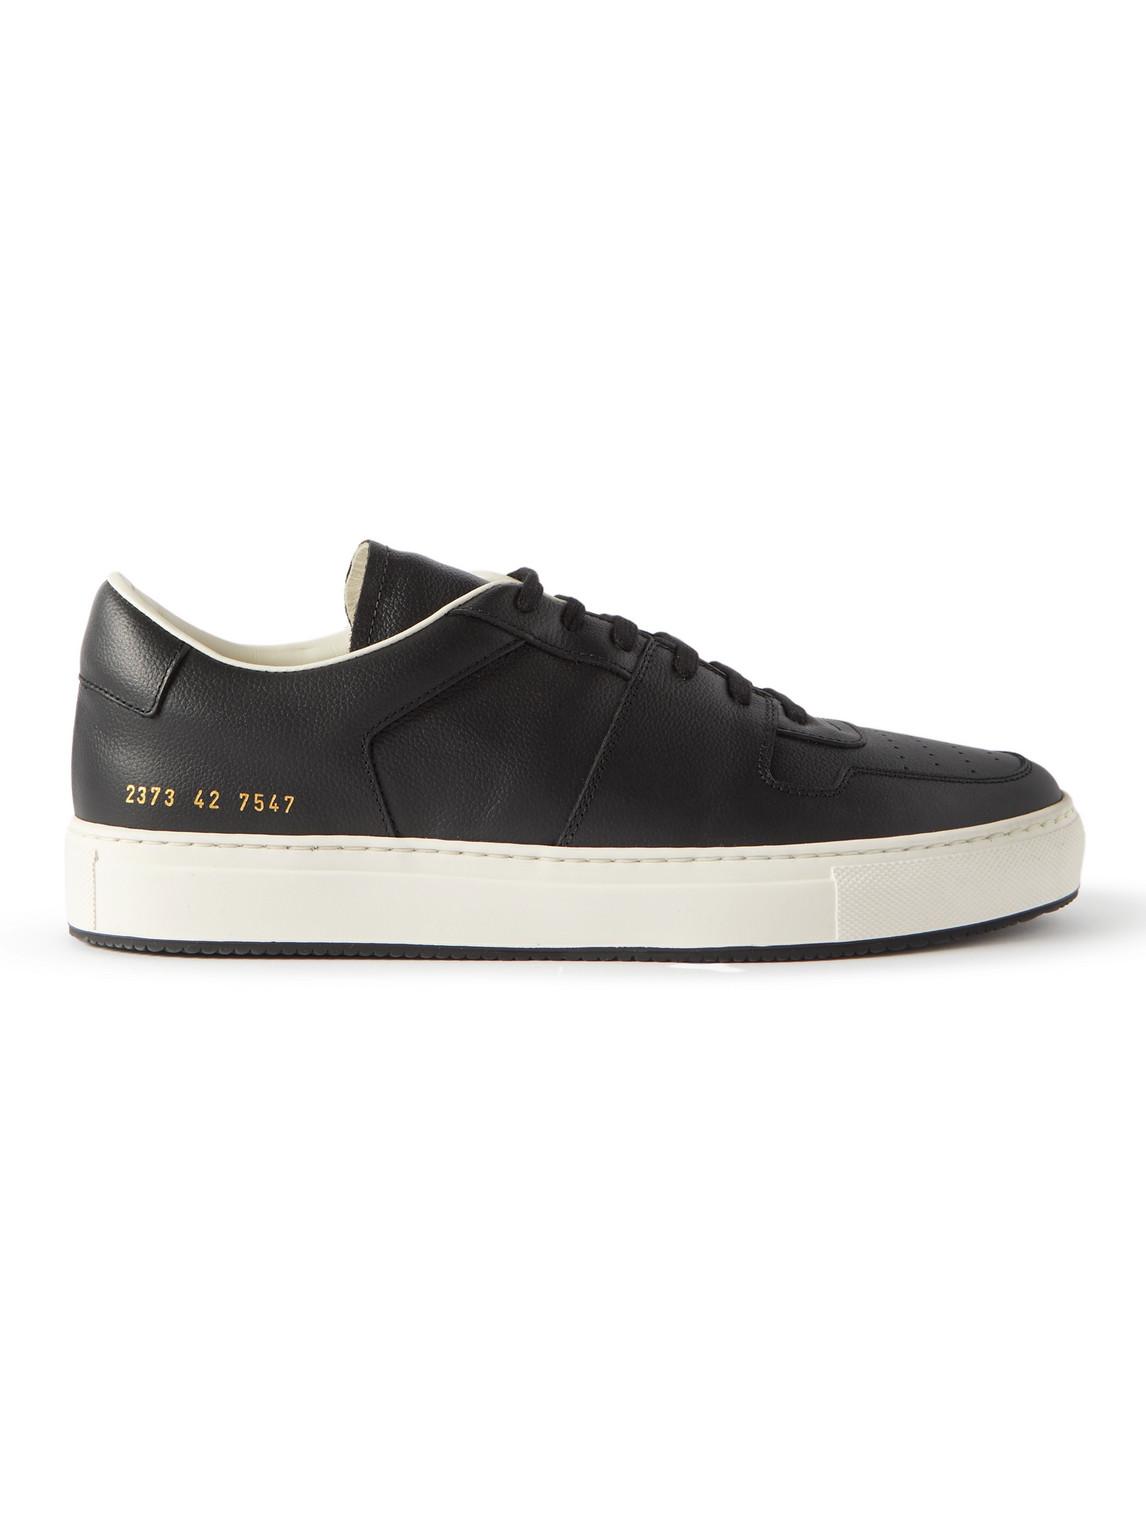 Common Projects Decades Full-grain Leather Sneakers in Black for Men | Lyst